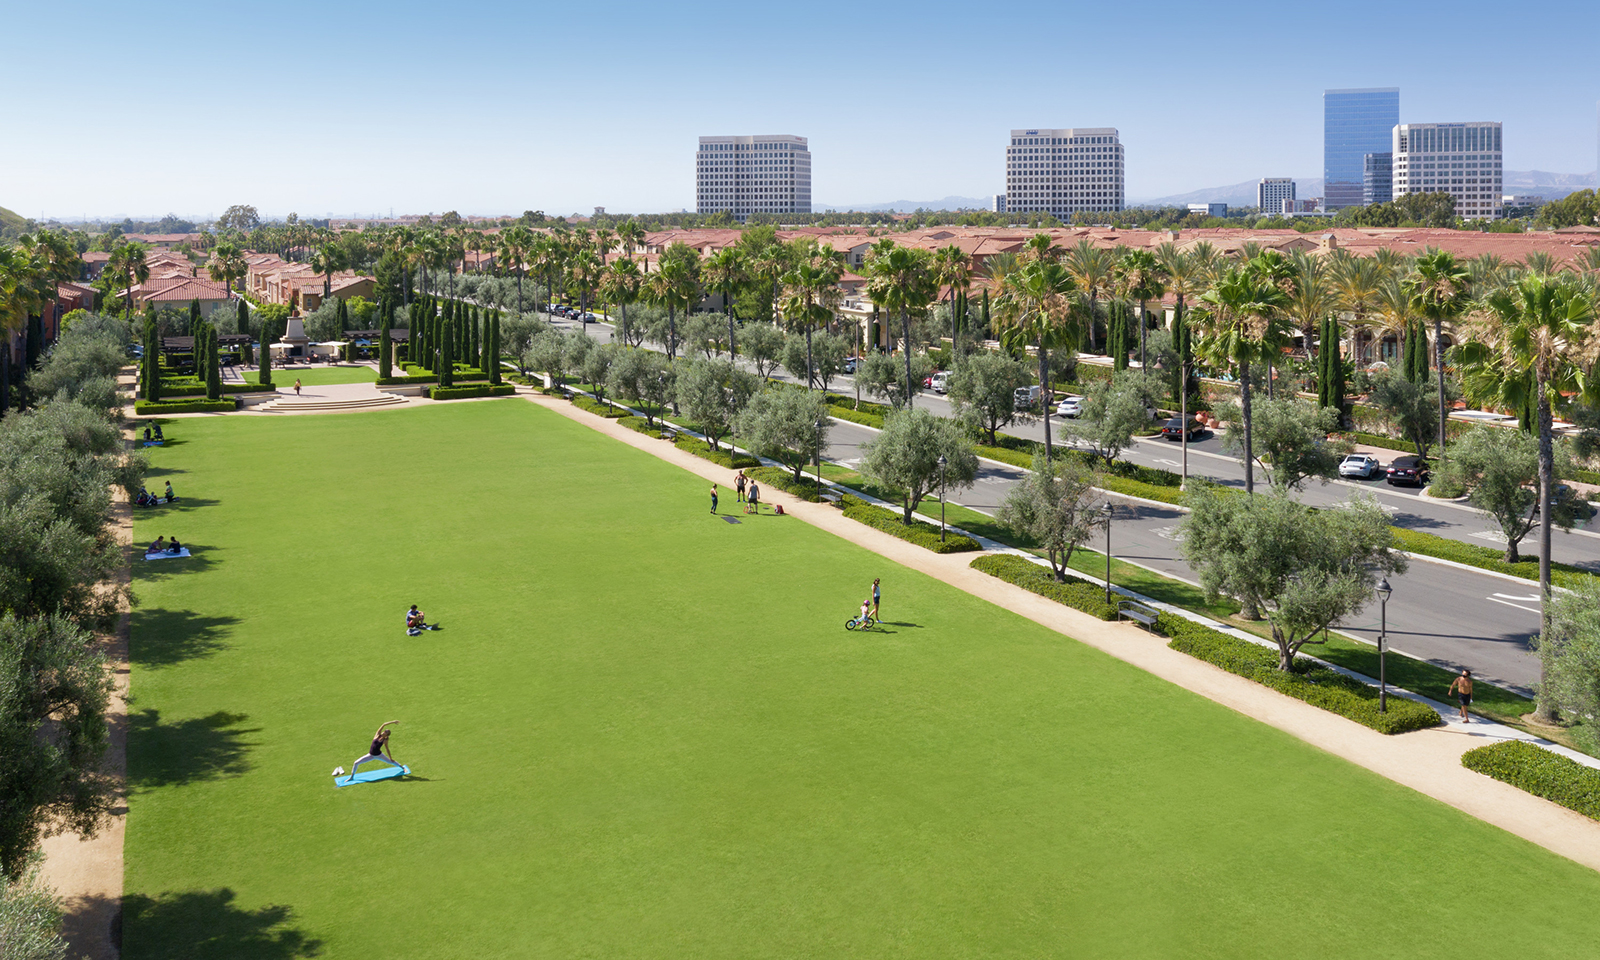 Planner says Irvine’s live-work-play environment is a model for future cities